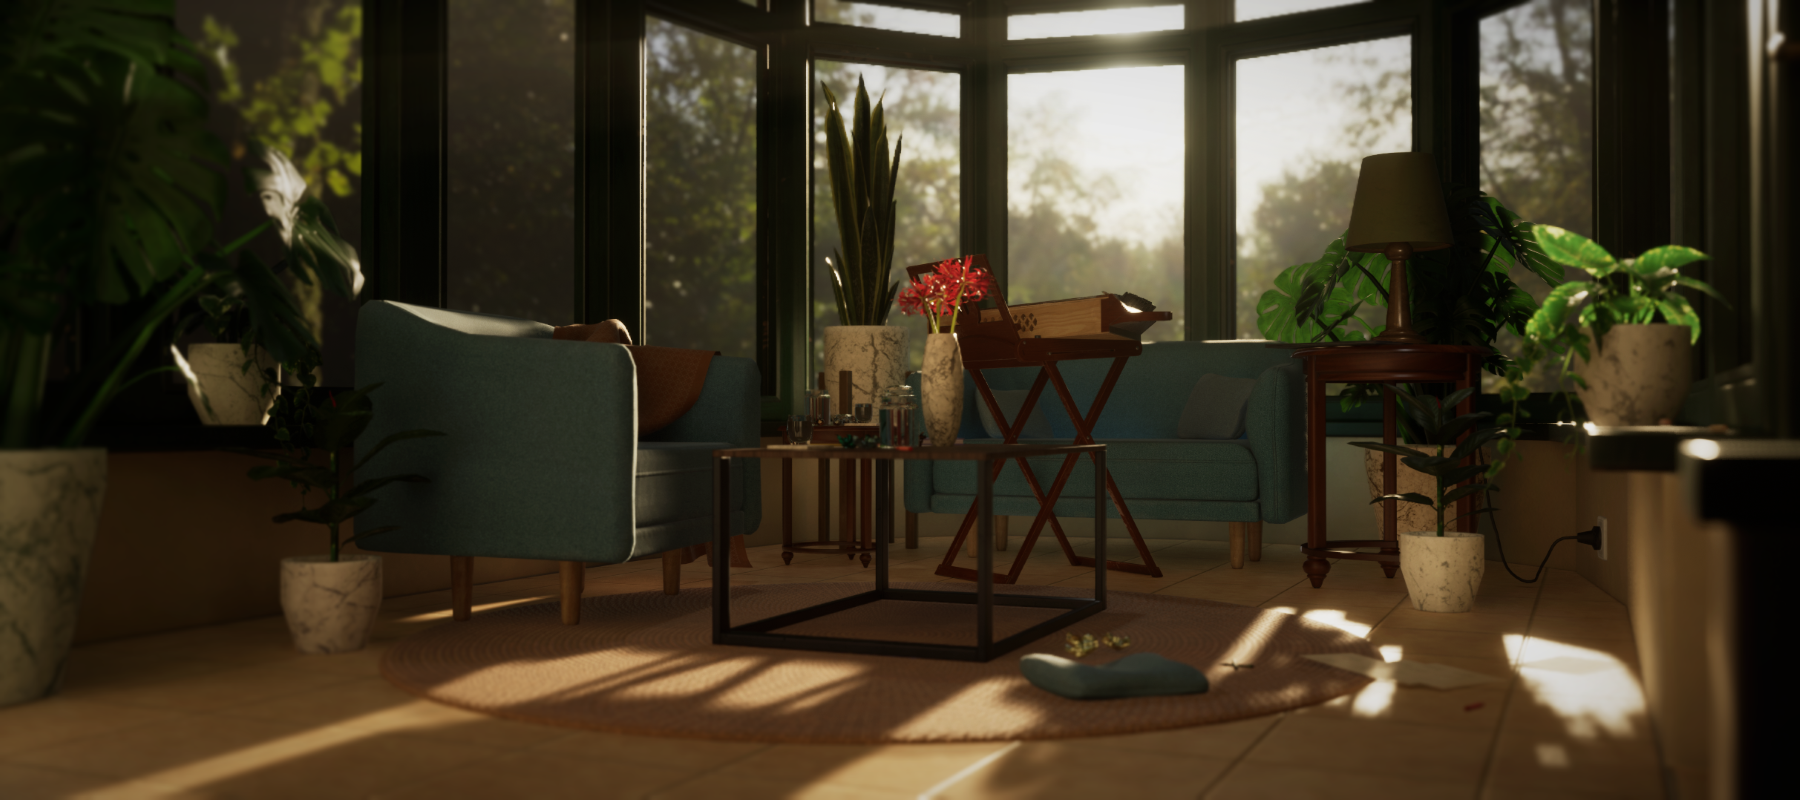 Second render of the conservatory.